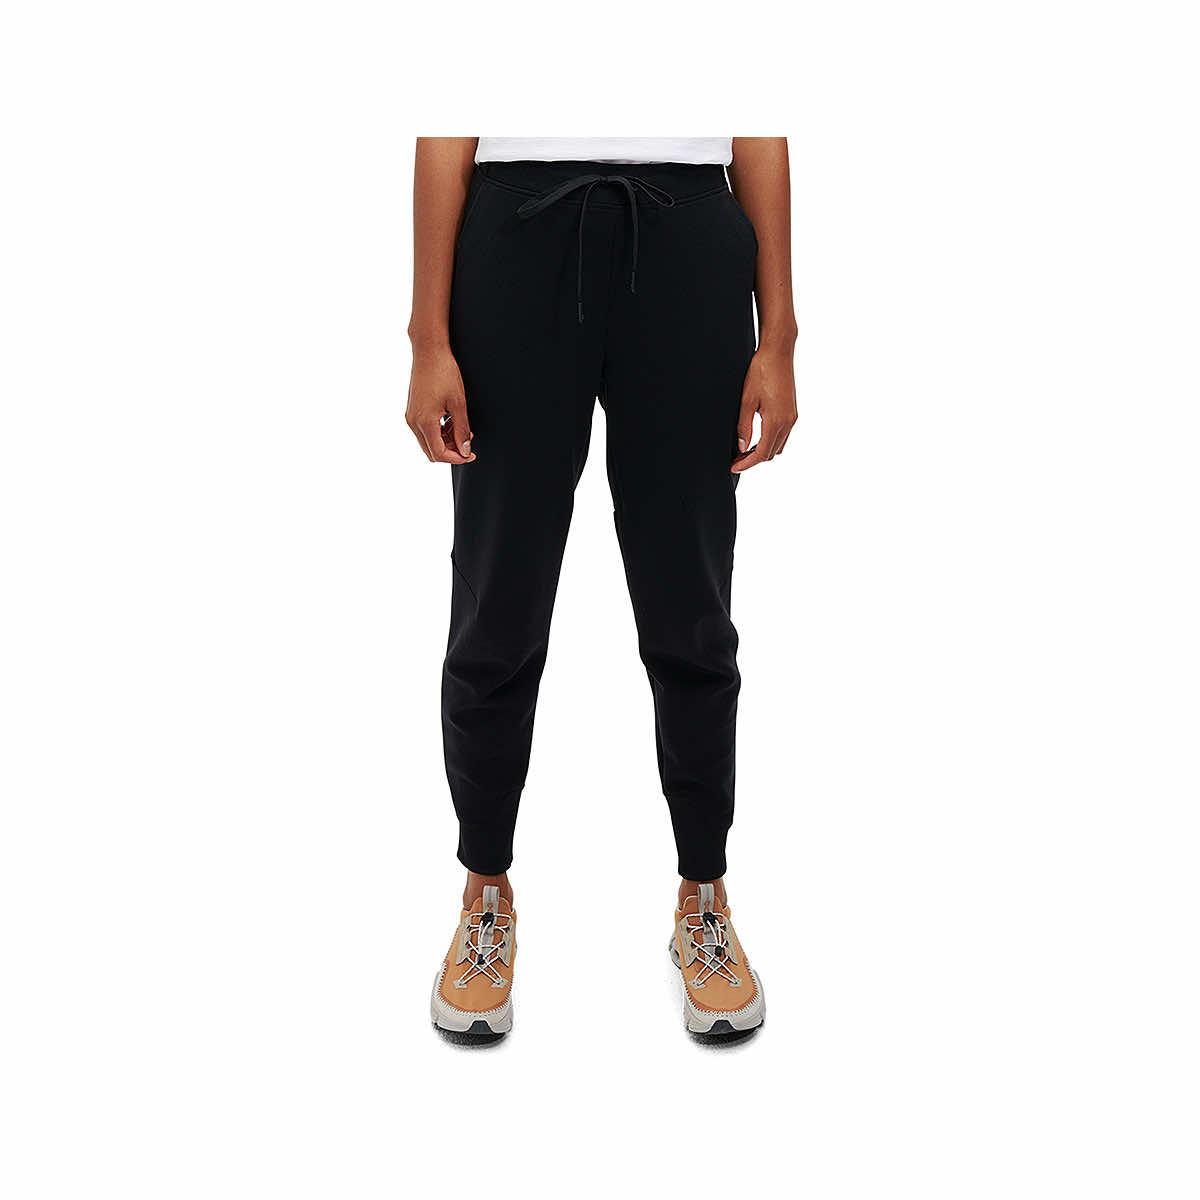 lululemon groove pant 23 (size 4), Women's Fashion, Bottoms, Other Bottoms  on Carousell